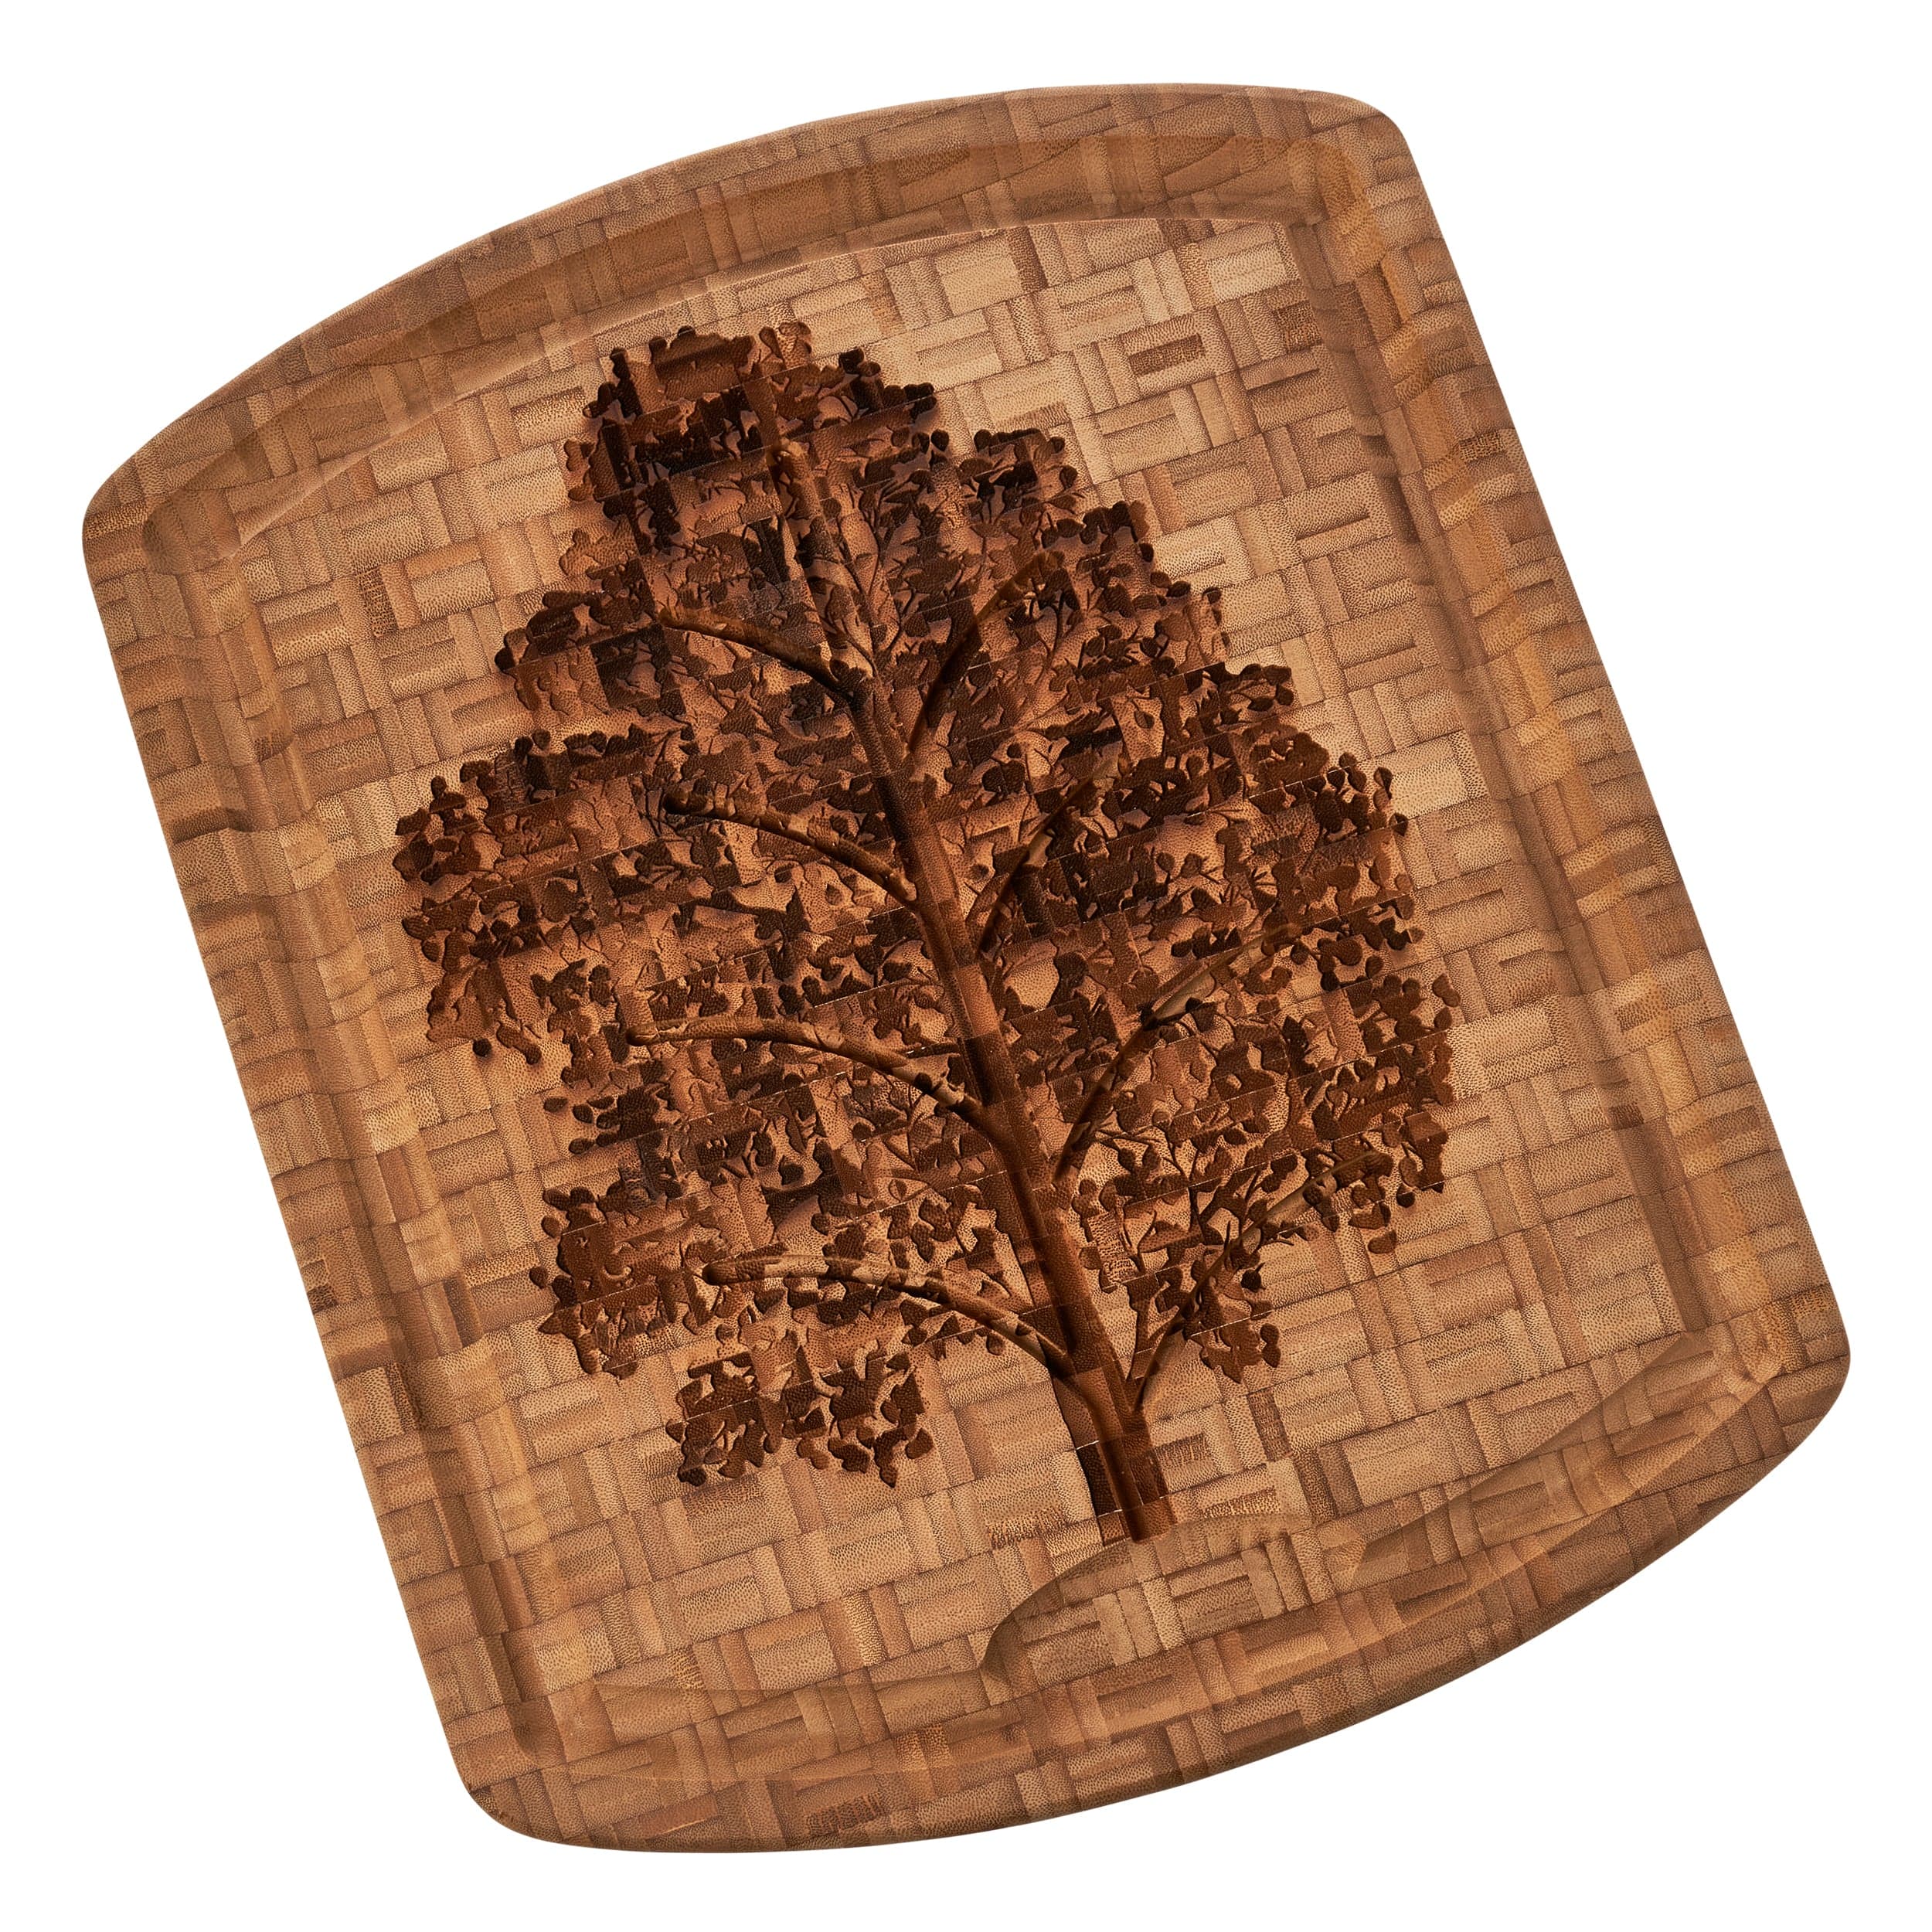 Totally Bamboo Family Tree Bamboo Carving Board with Etched Juice Groove, 19-1/2" x 15-3/4" x 1"